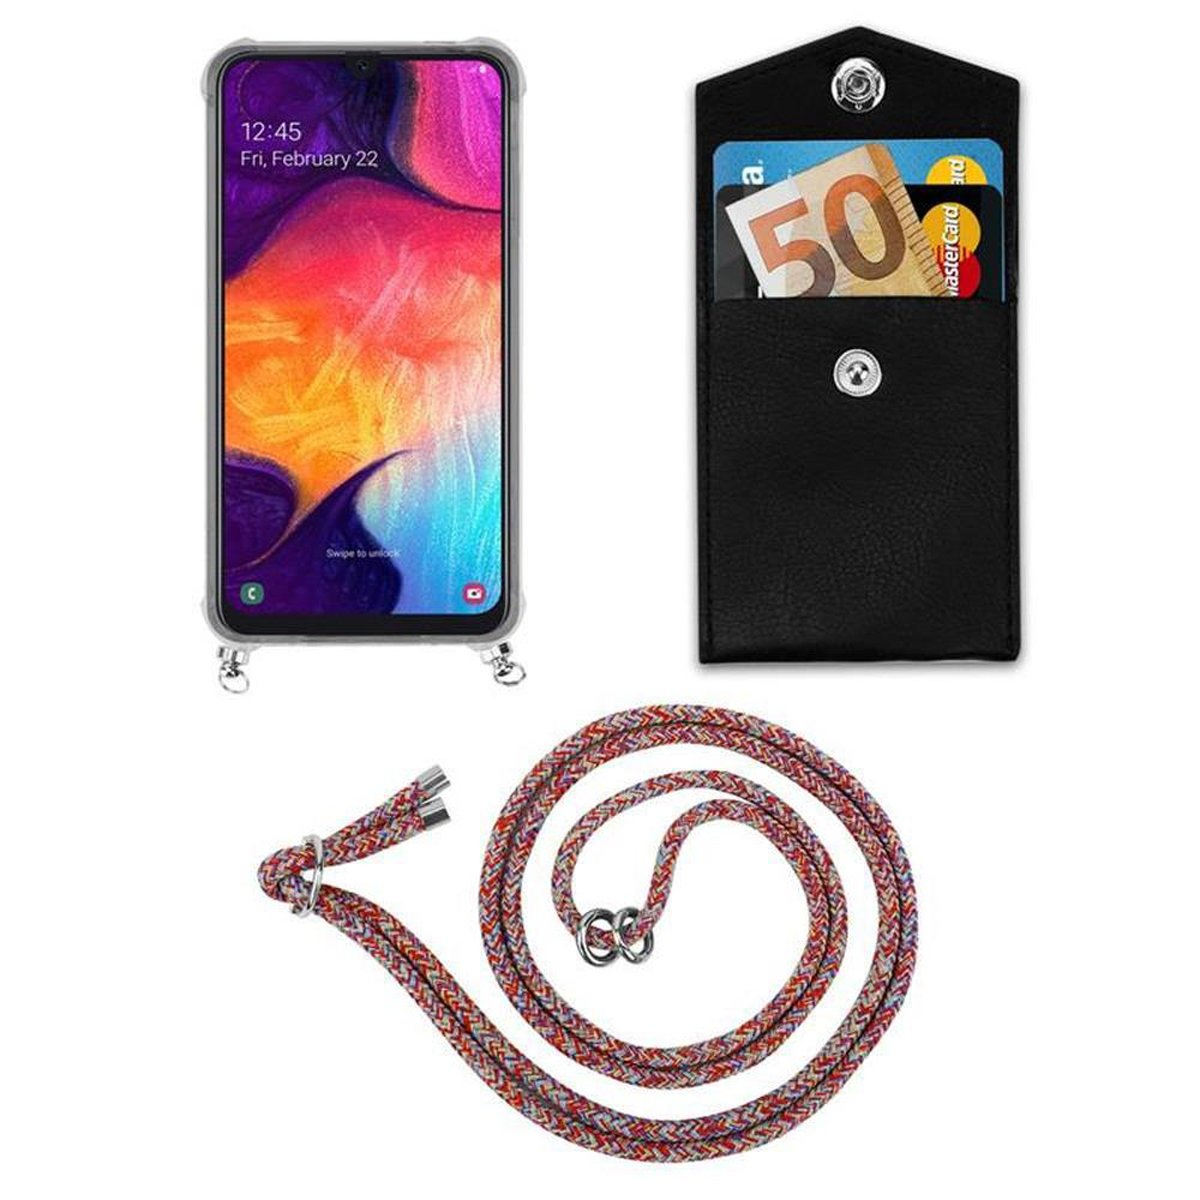 CADORABO Galaxy Handy A50s abnehmbarer Hülle, Silber Kordel Samsung, A30s, und Ringen, / PARROT 4G COLORFUL Band Kette / A50 Backcover, mit